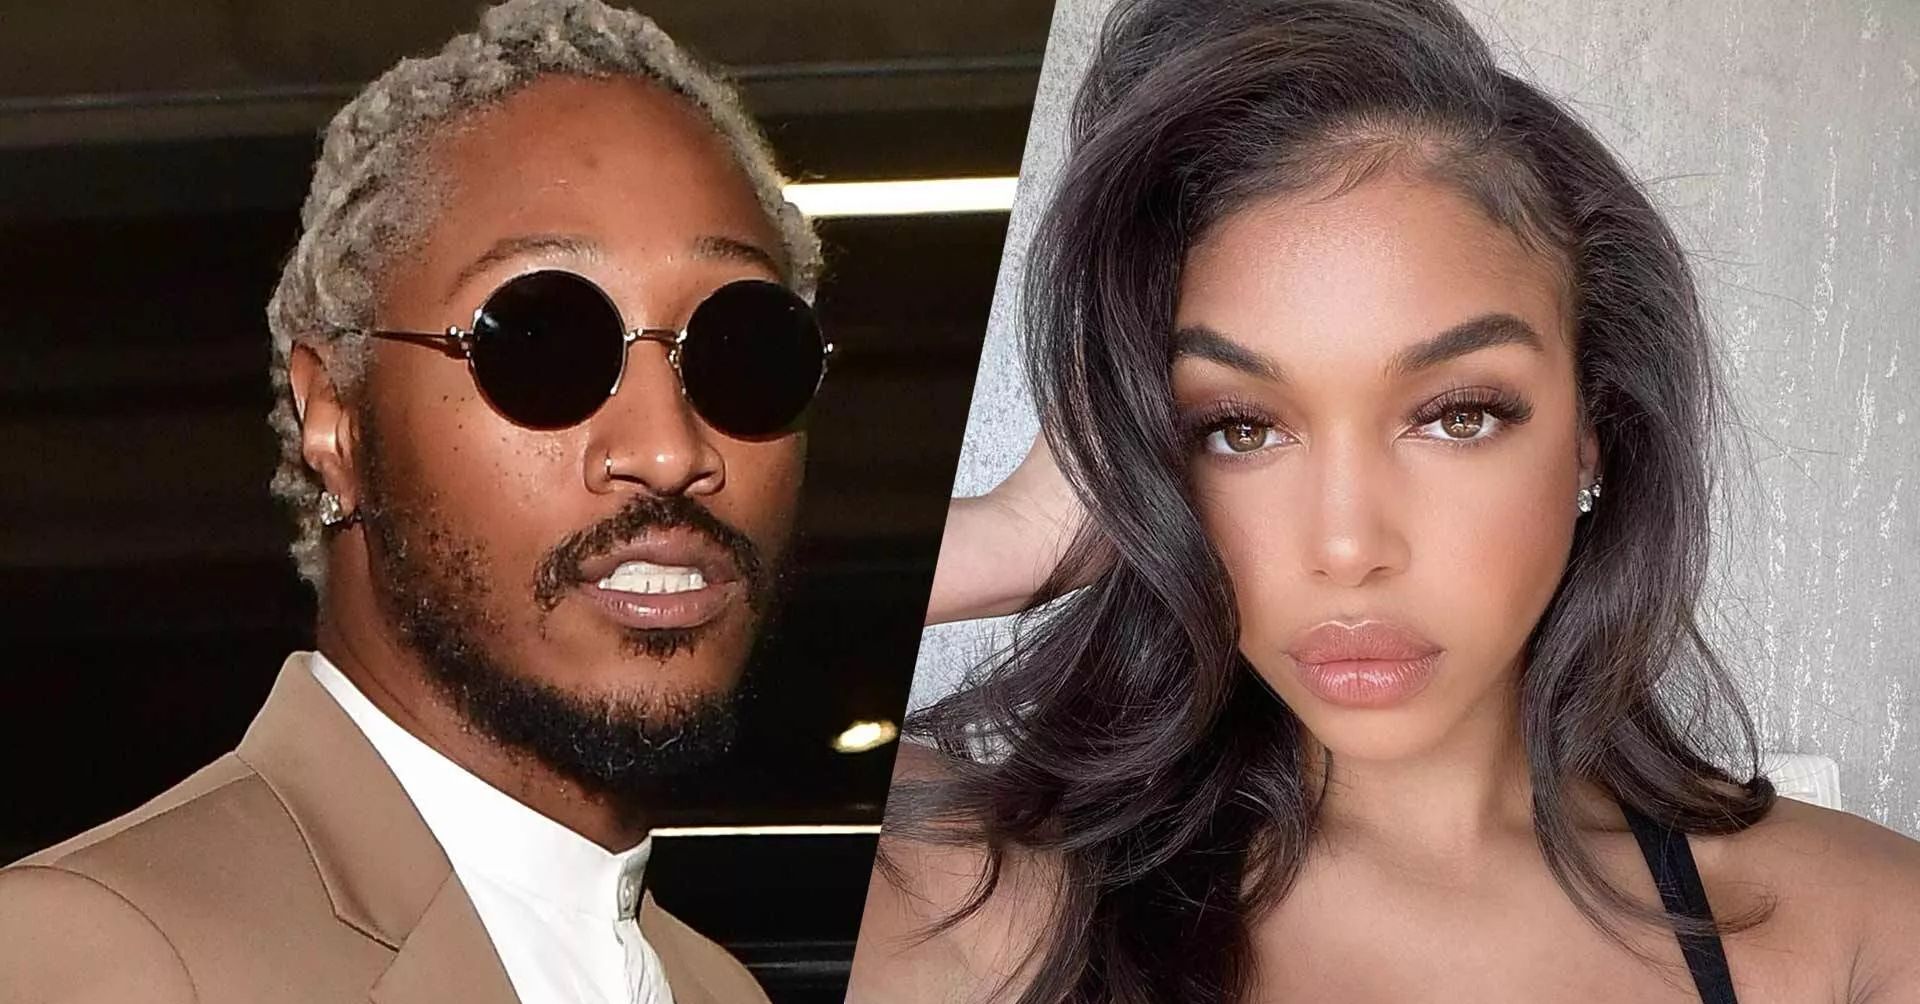 Future's Girlfriend Lori Harvey Pretty In Pink While Locked Up With Rapper